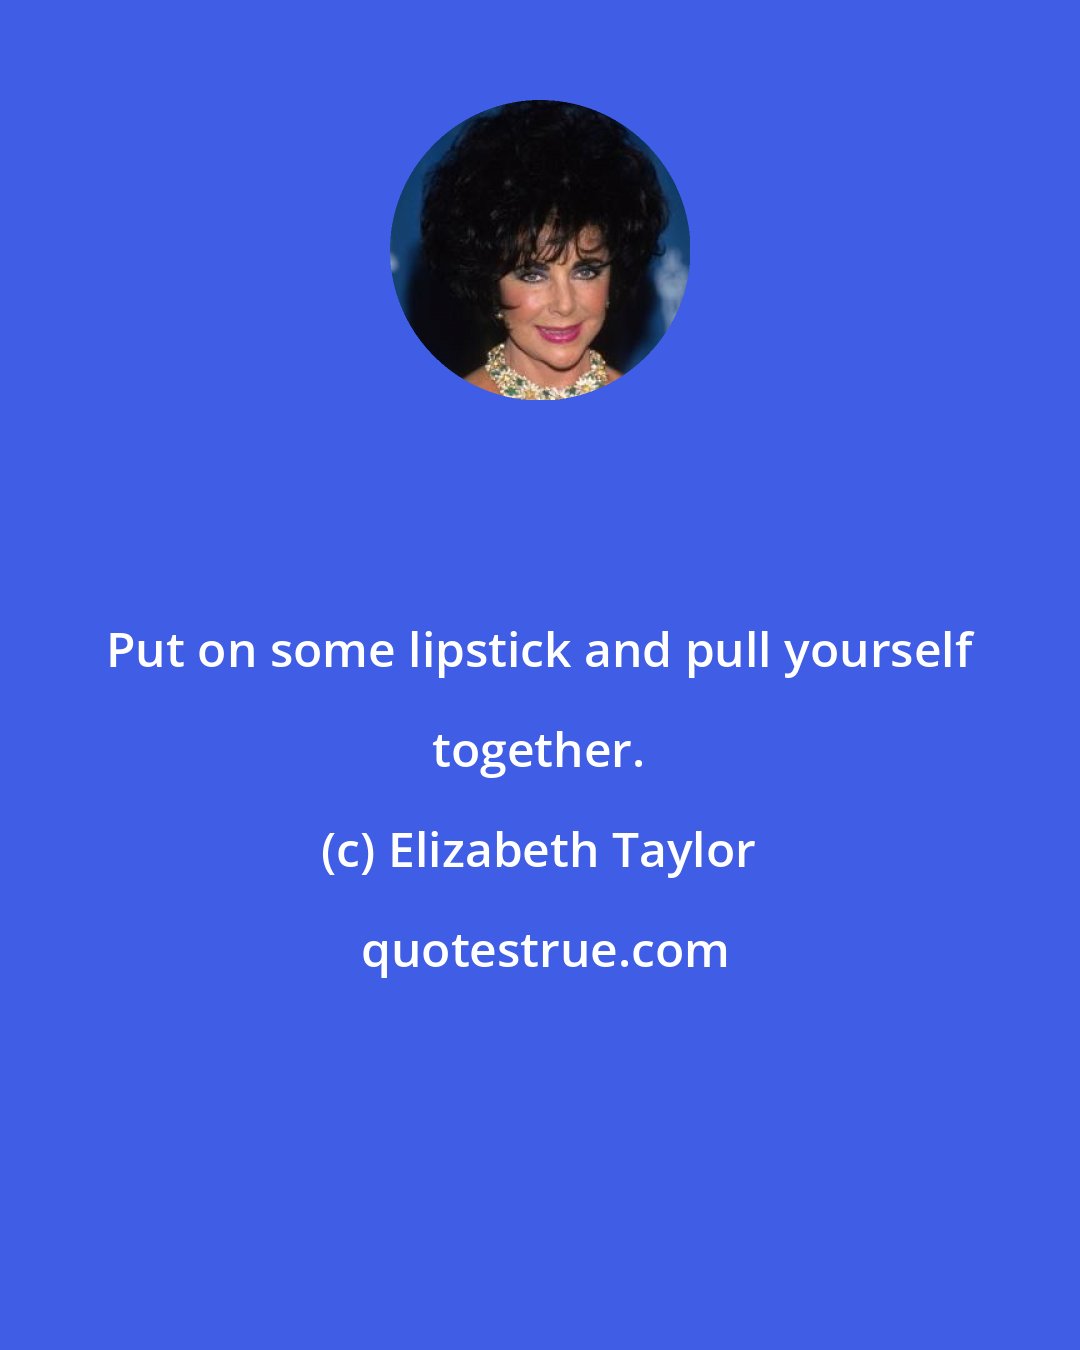 Elizabeth Taylor: Put on some lipstick and pull yourself together.